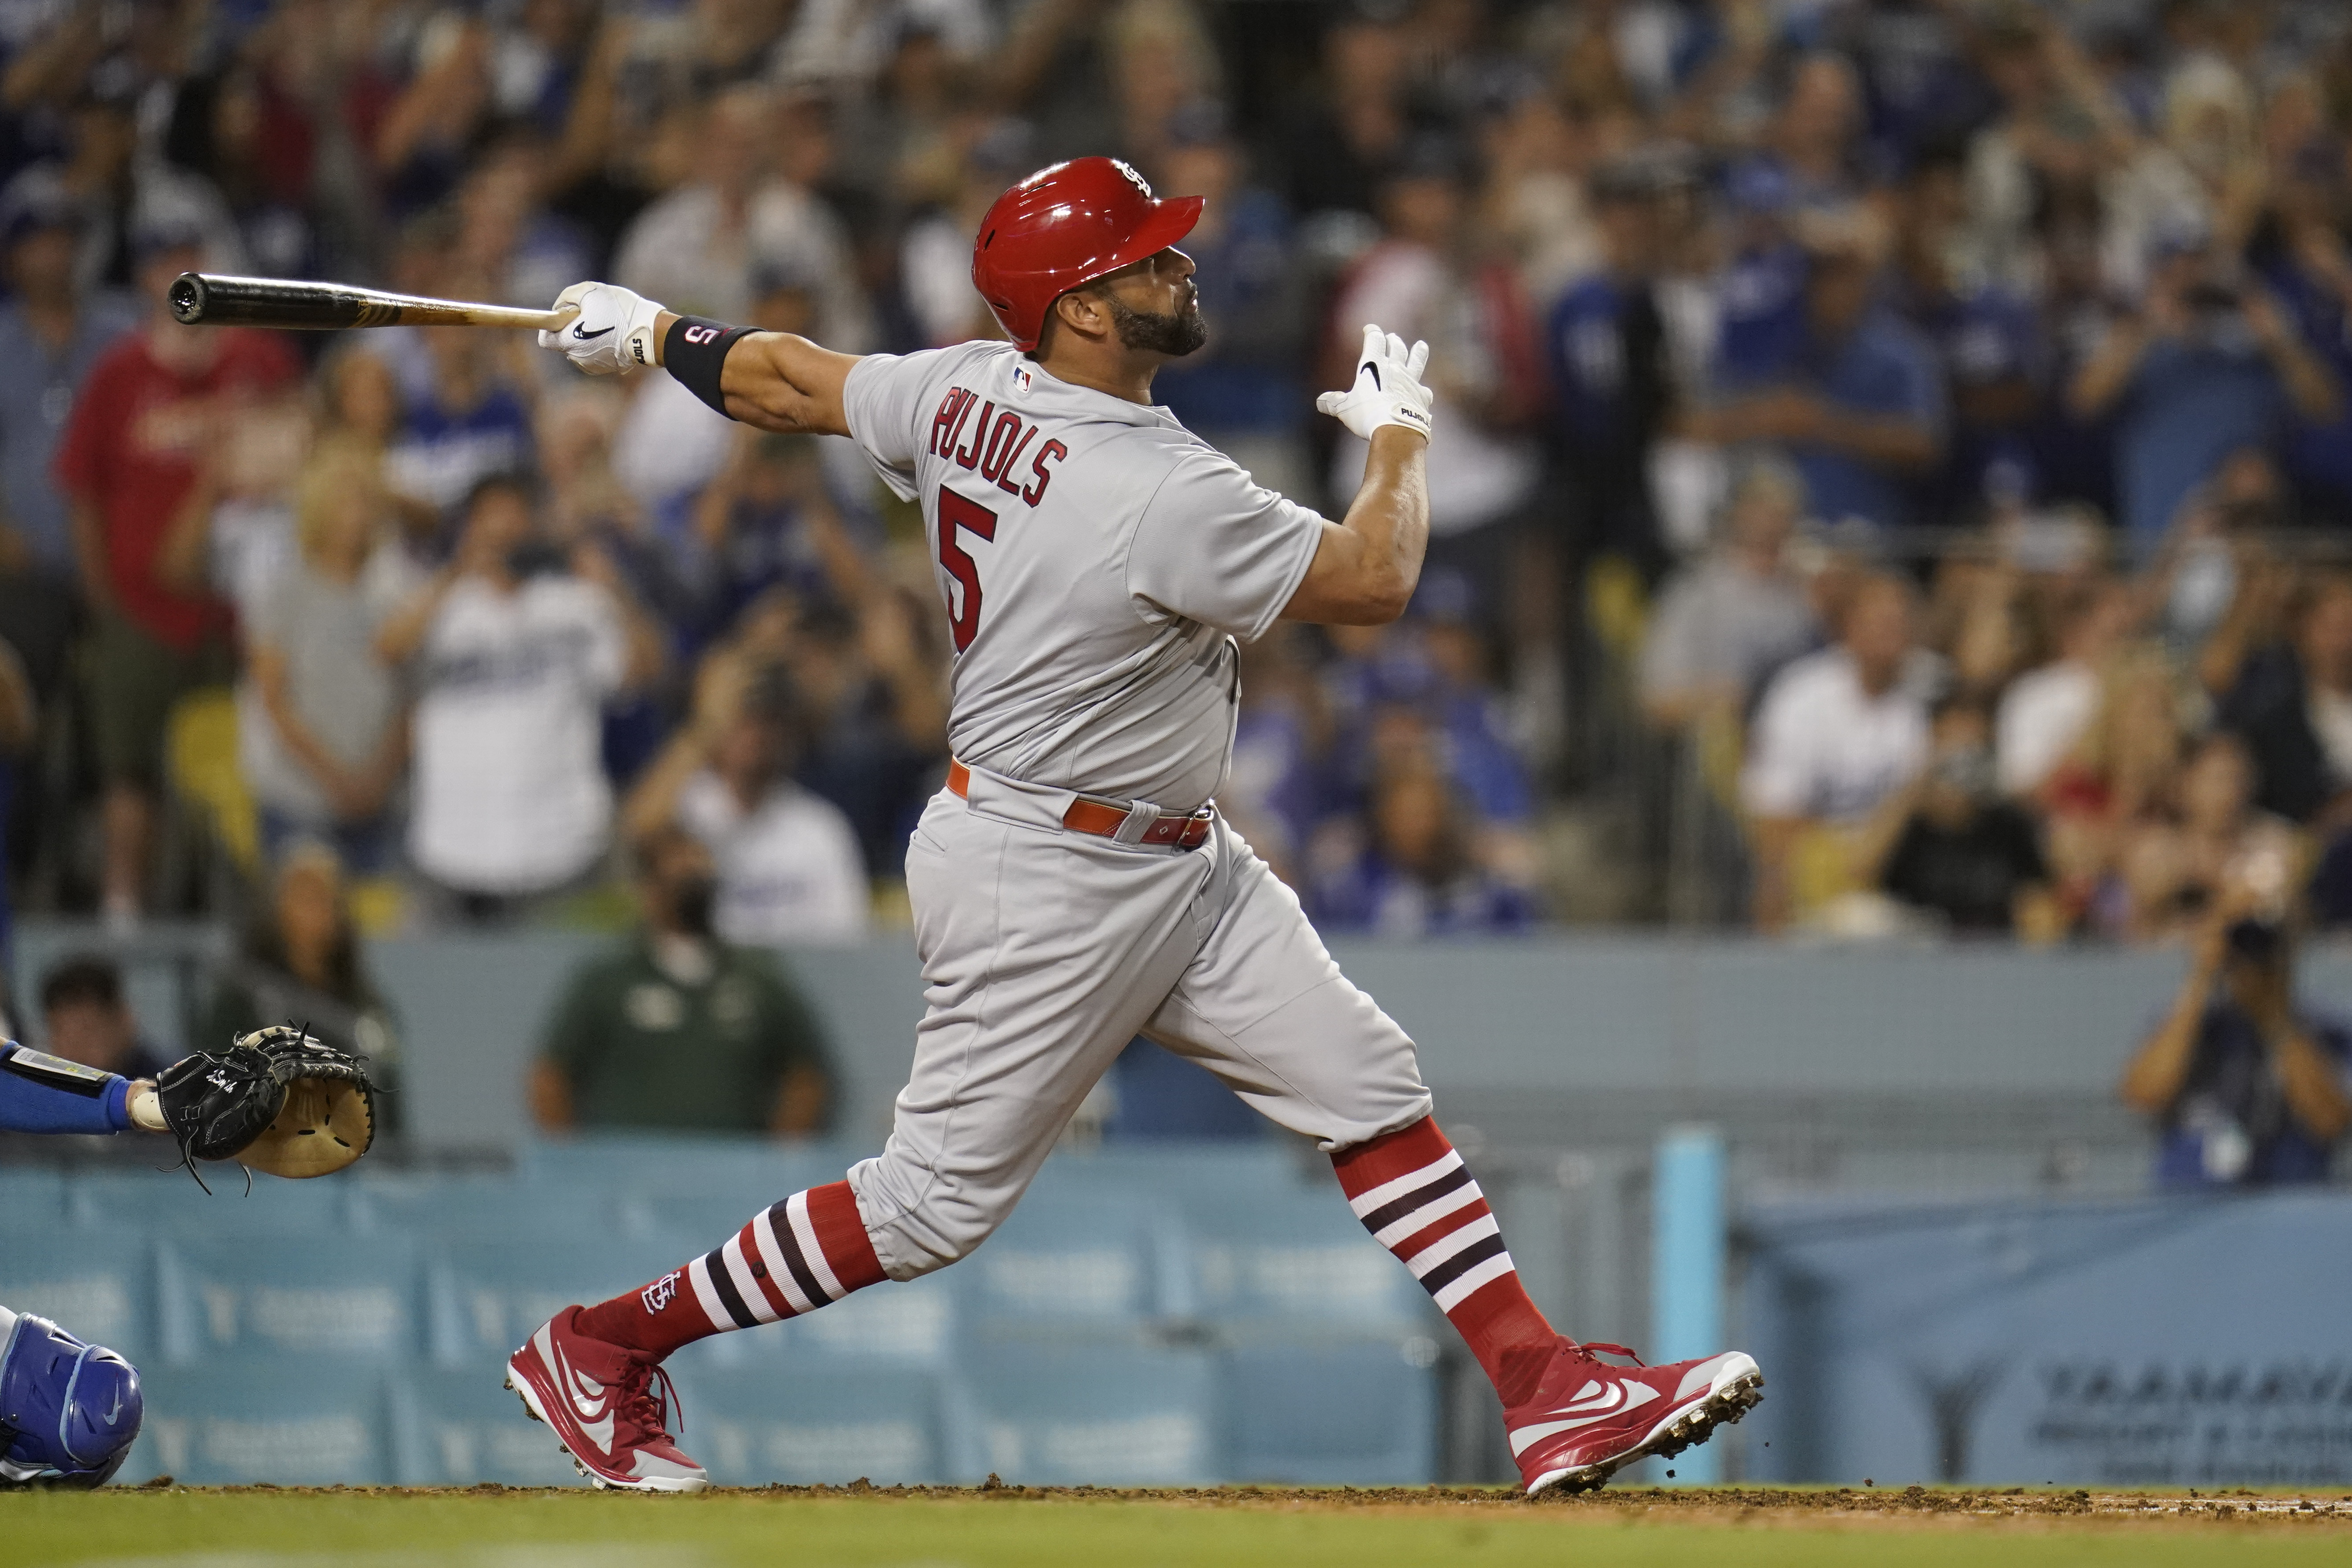 Cardinals, with a wheezing offense, create a run without a hit to